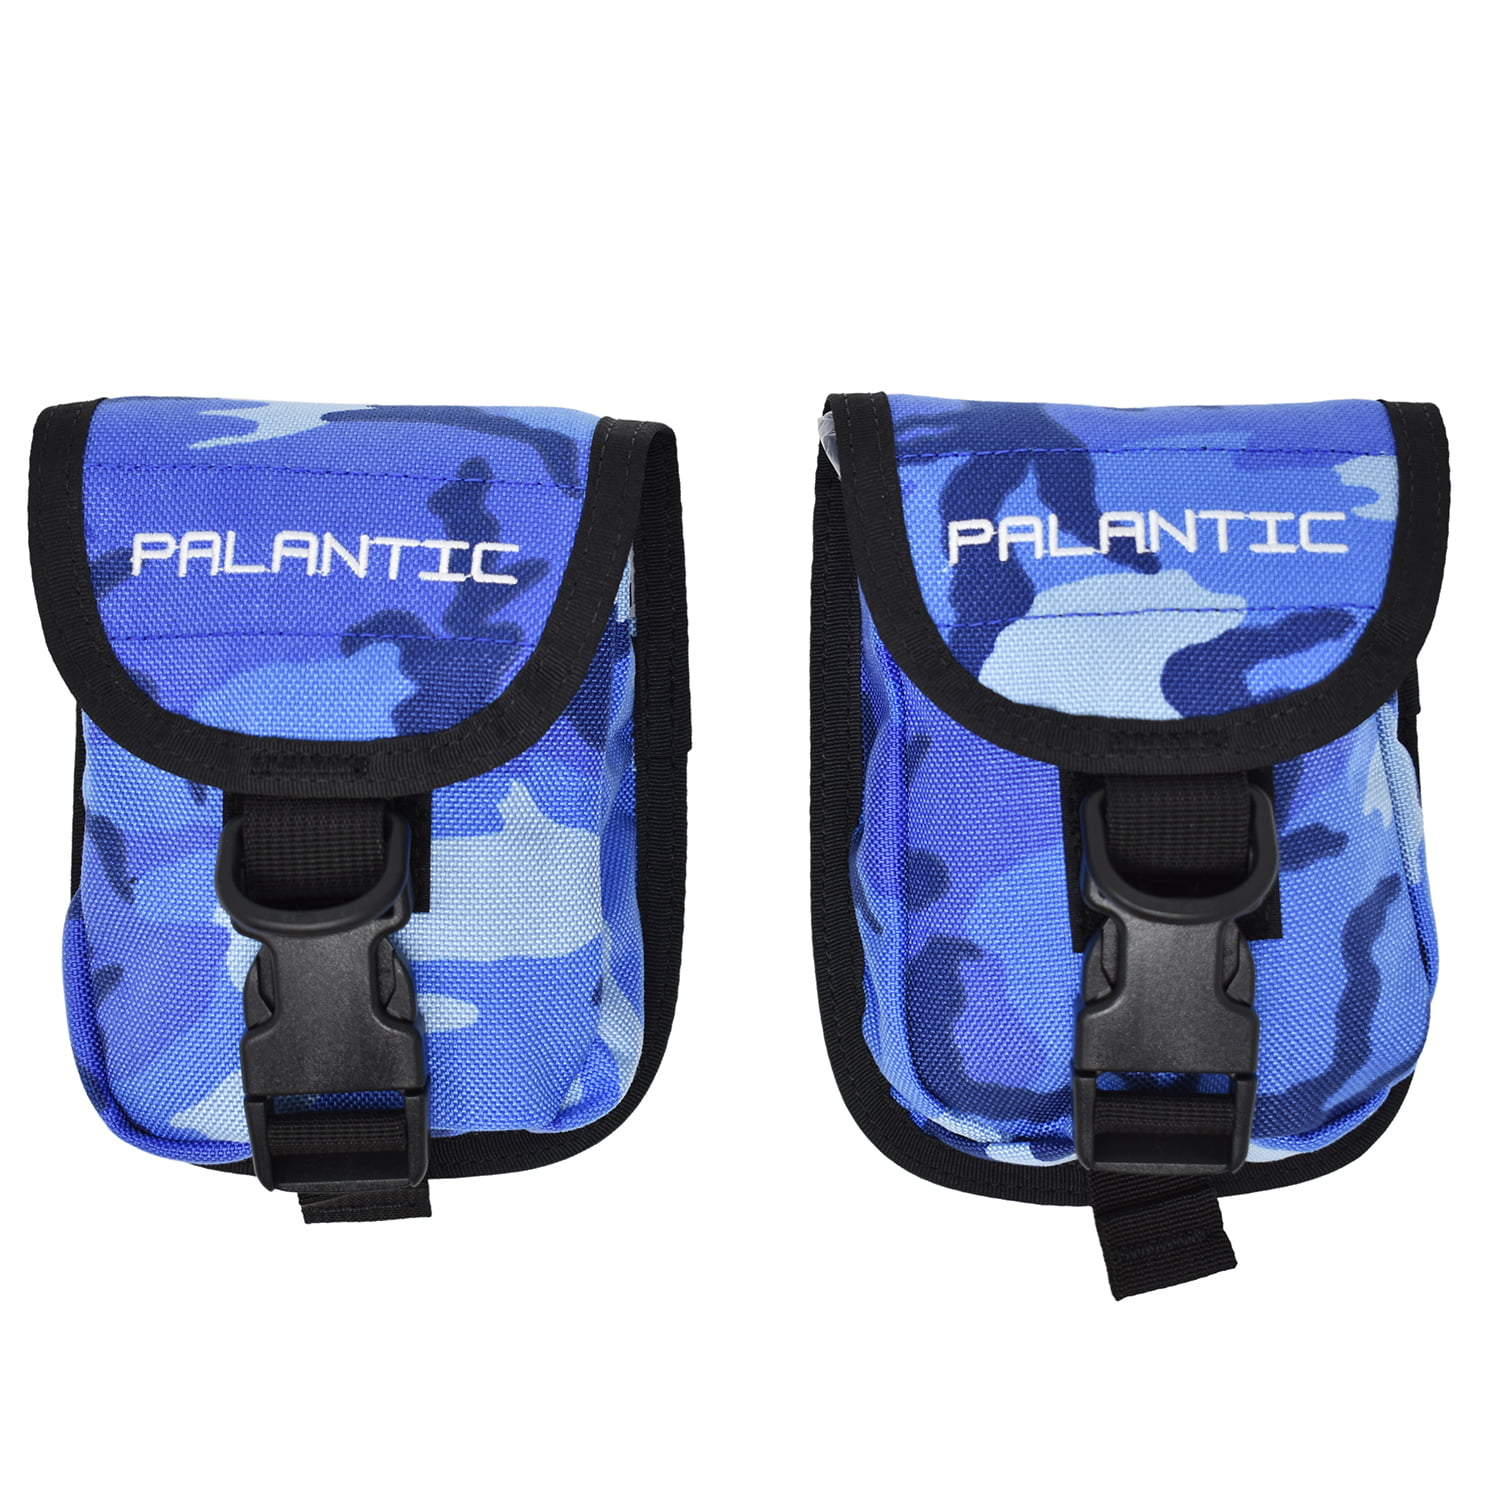 Details about   Palantic Scuba Diving Weight Pocket Pouch with QR Buckles Blue Pair